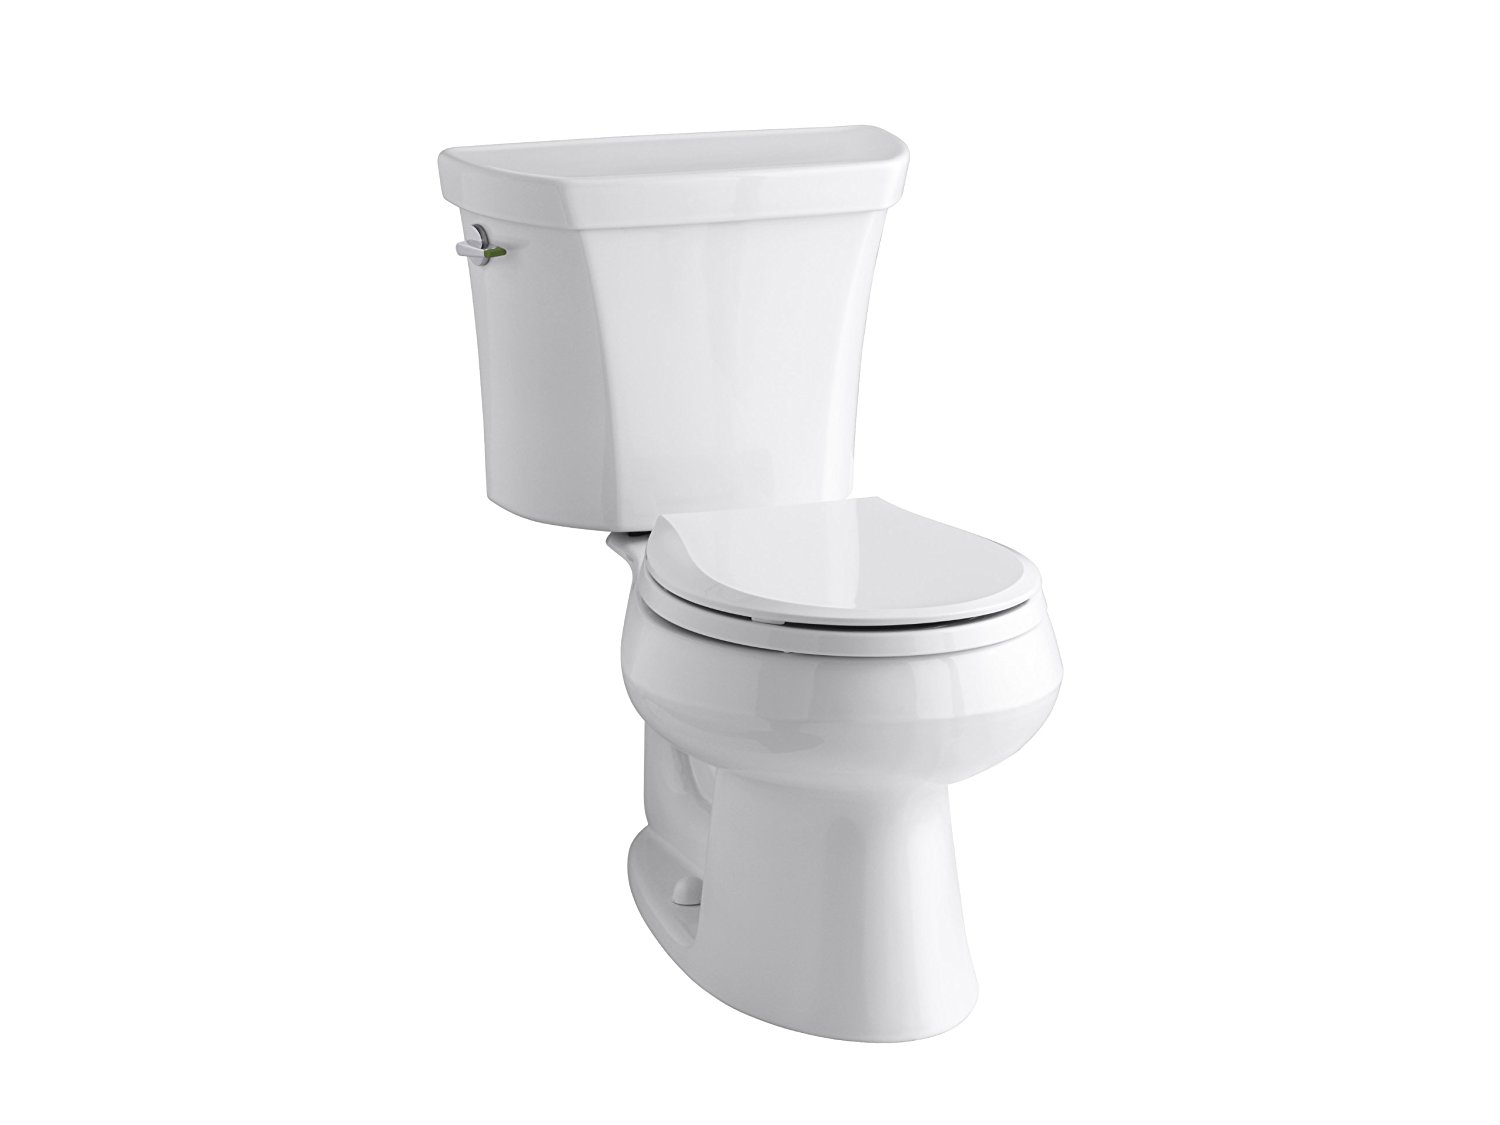 KOHLER K-3987-0 Wellworth Two-Piece Round-Front Dual-Flush Toilet with Class Five Flush System and Left-Hand Trip Lever, White